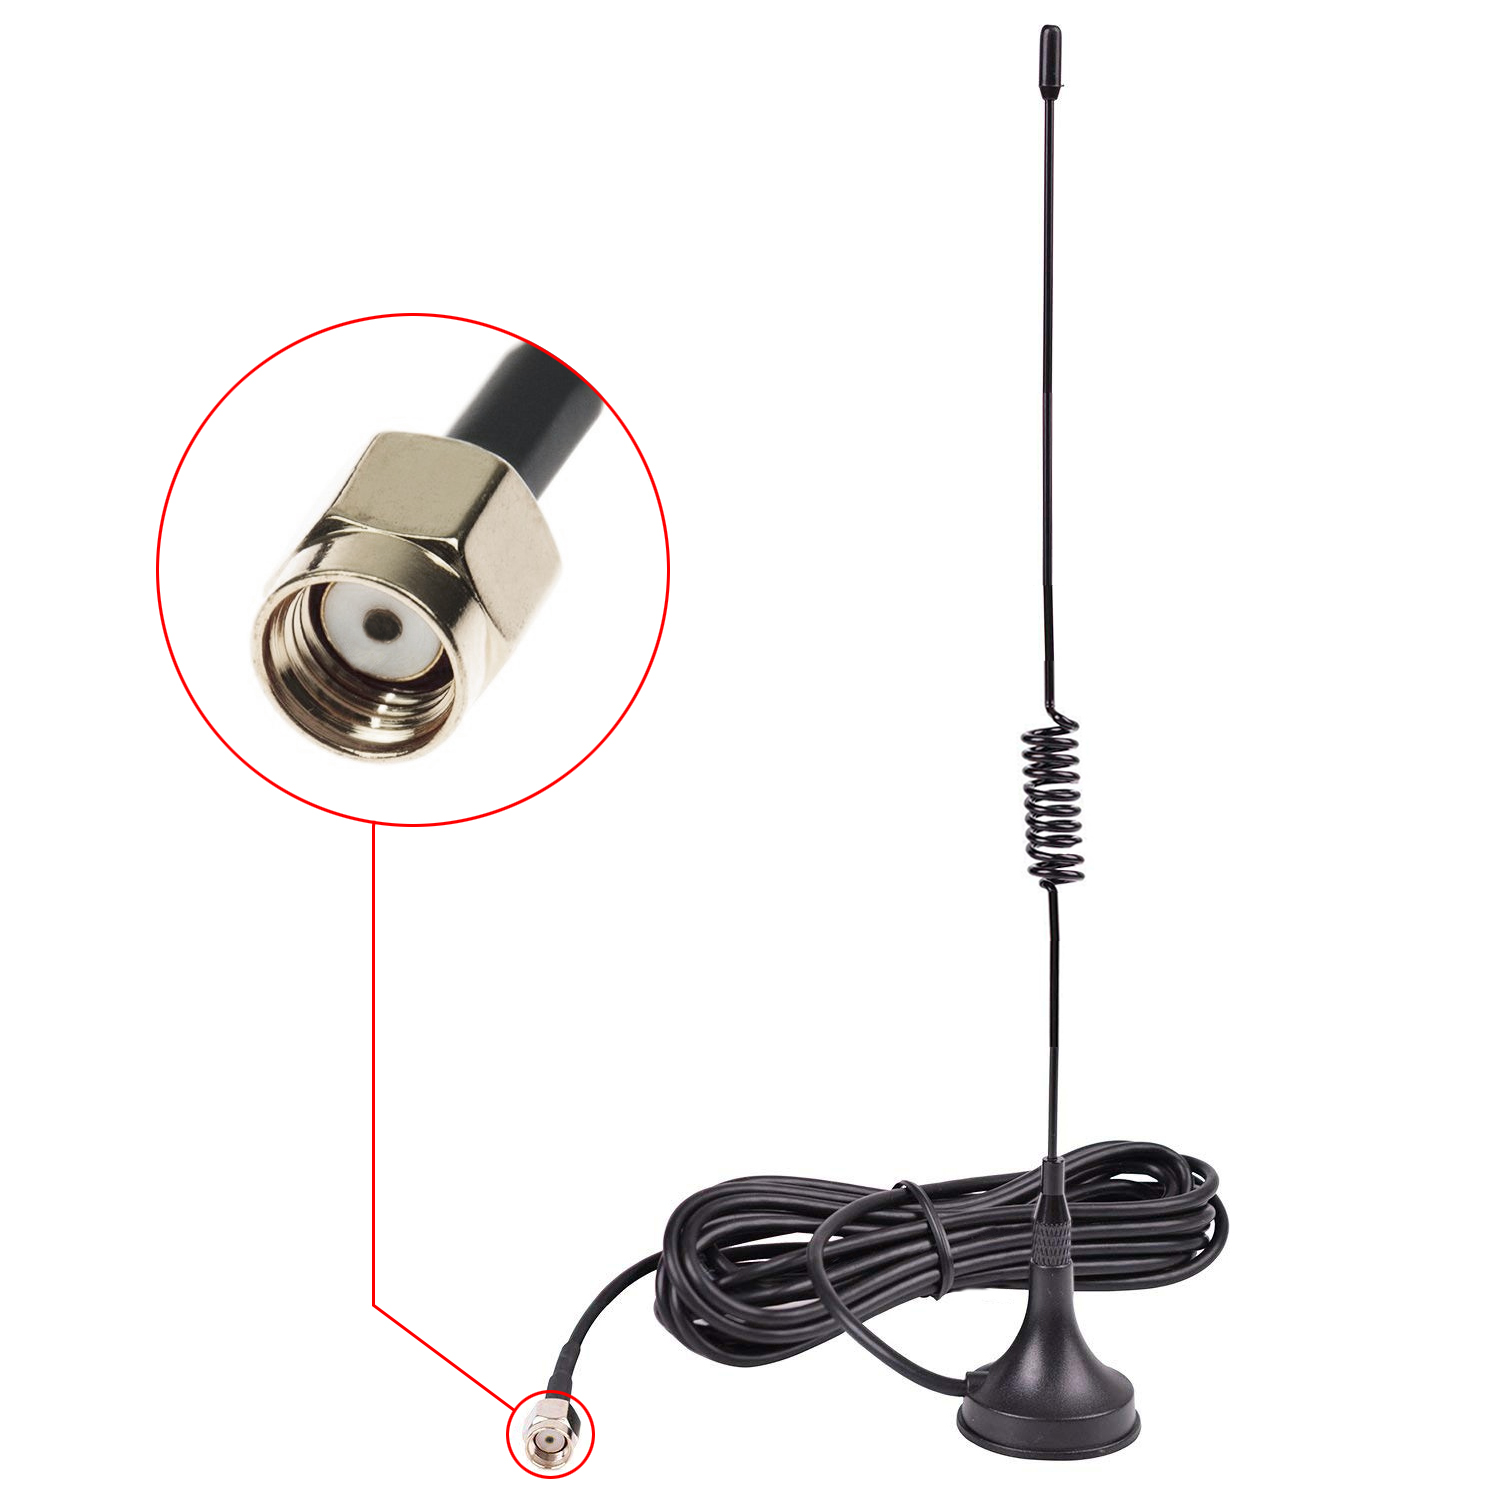 Antenna Extension Cord 7DB 10 FT with Magnetic Stand Base for Cromorc CCTV Security Camera SMA Female Connector